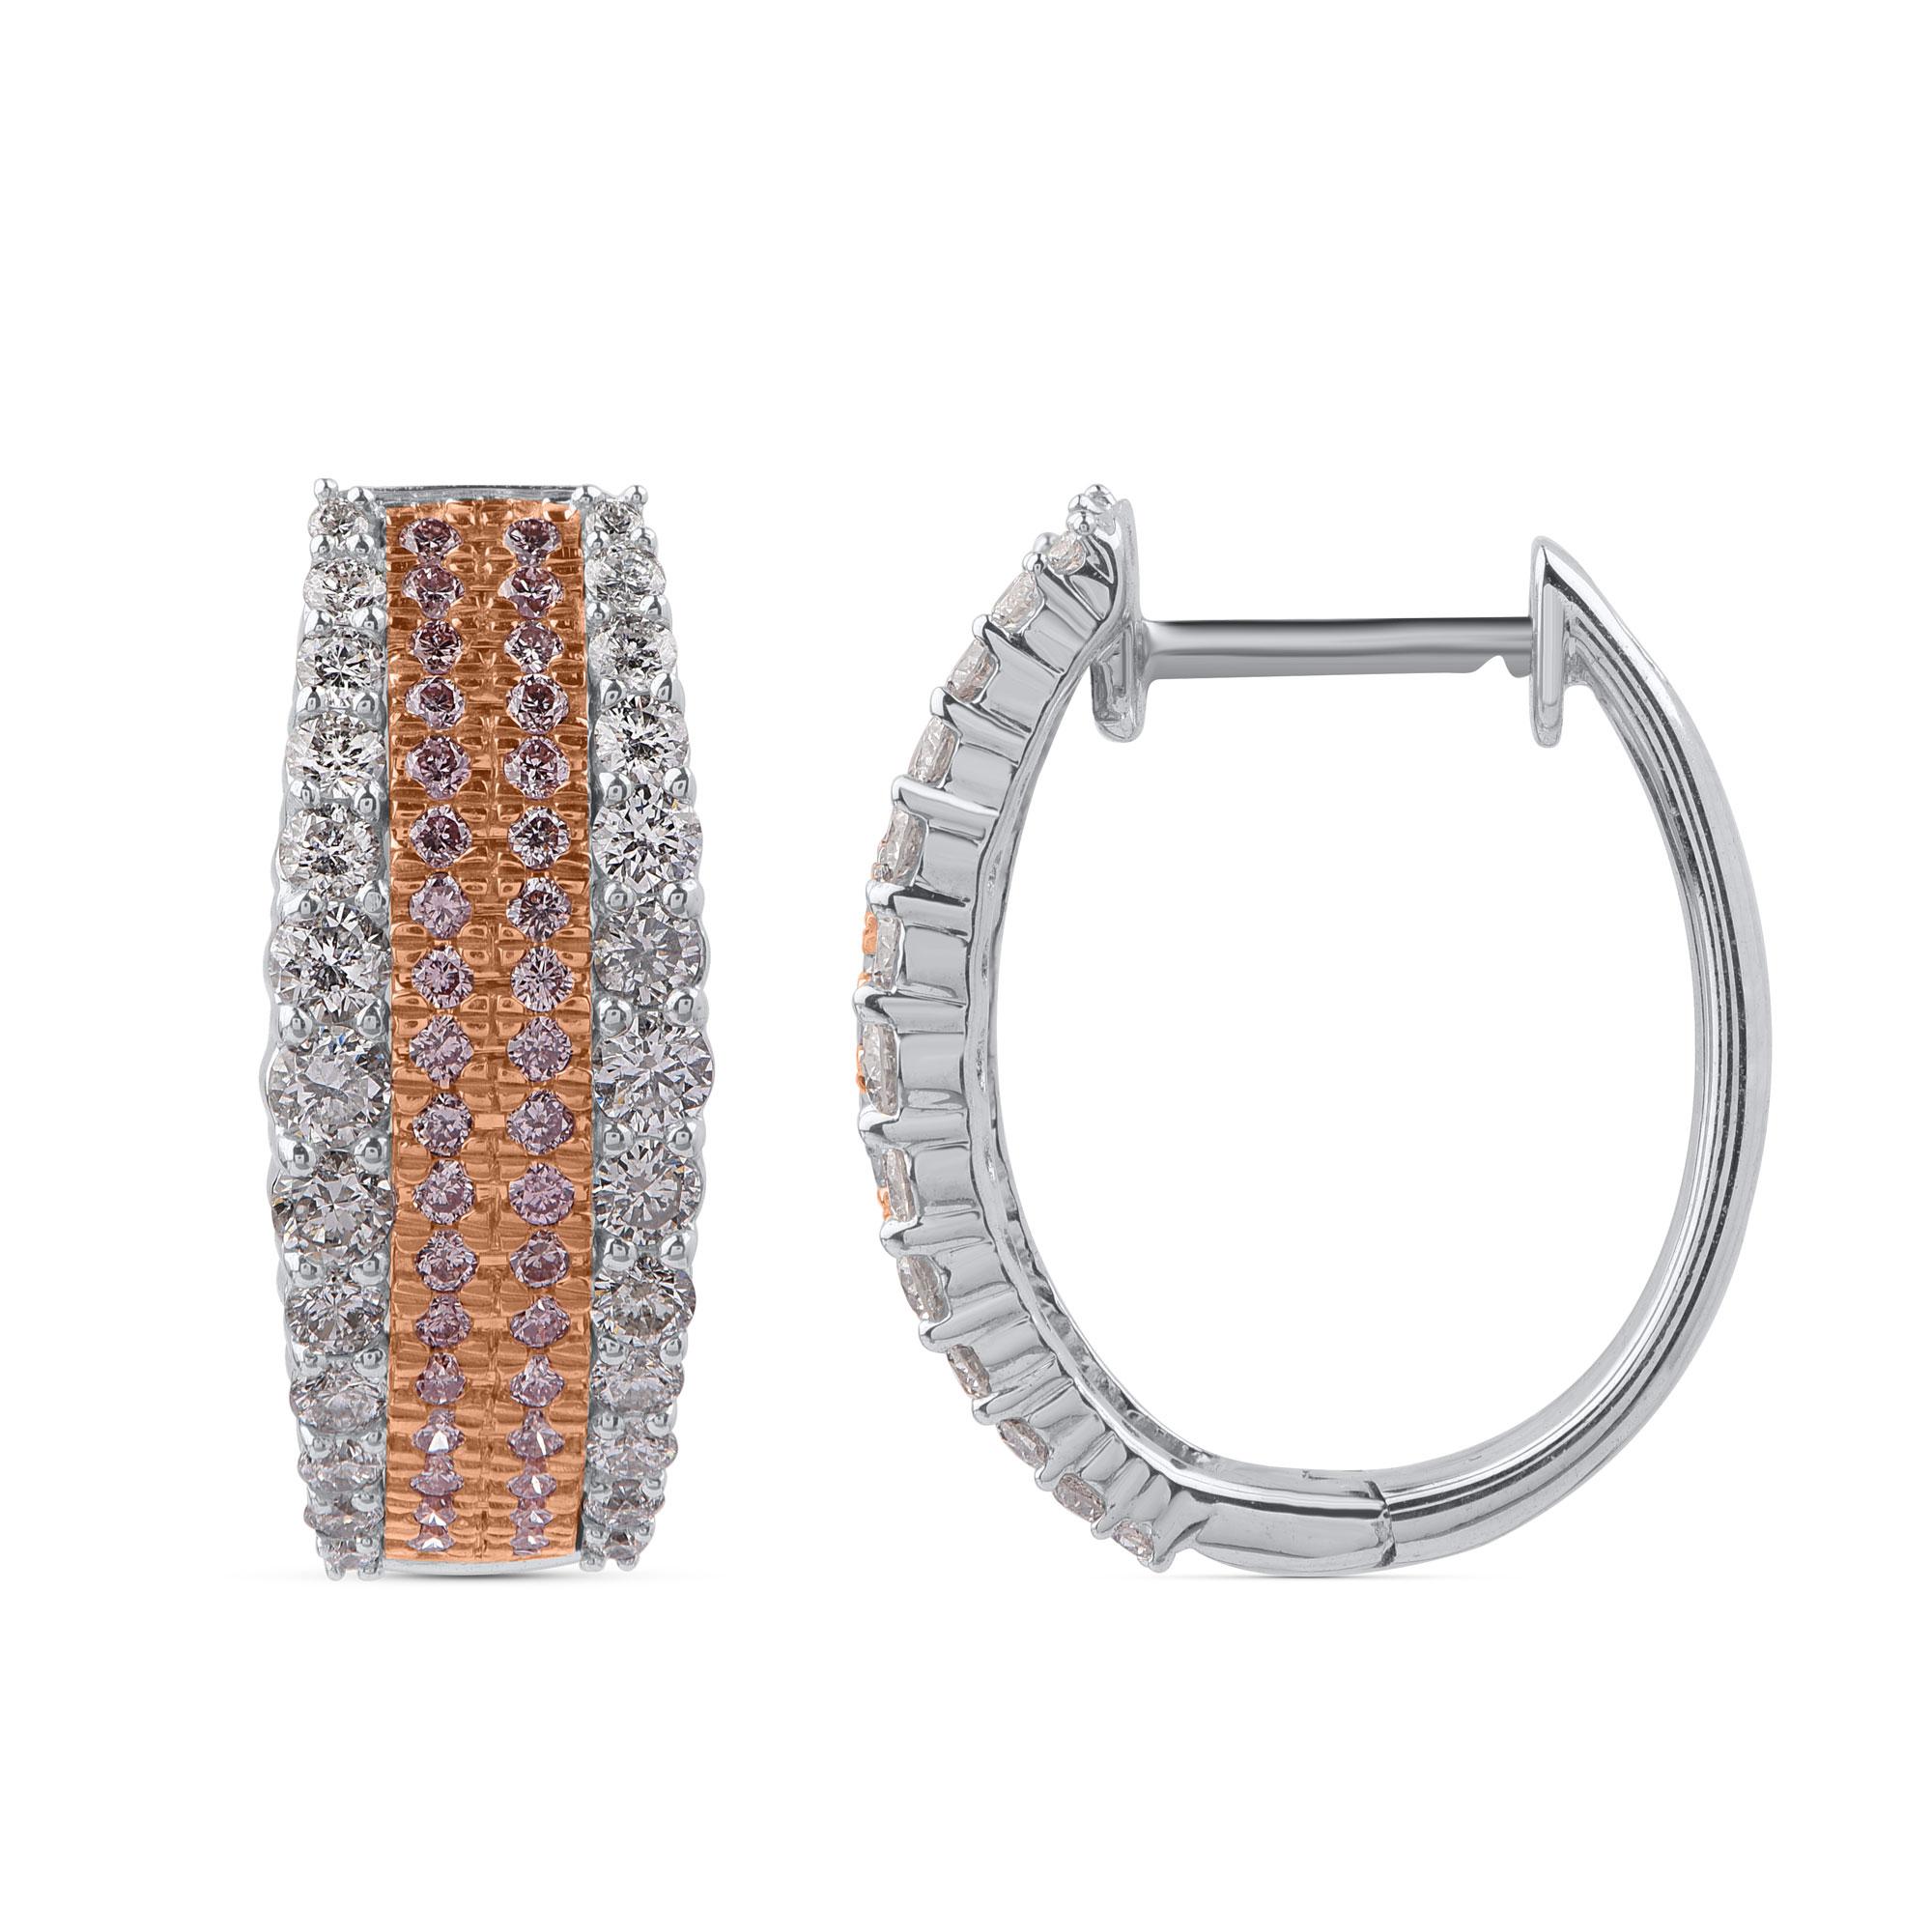 Mesmerizing and glamorous, this natural pink rosé and white diamond hoop earrings are studded with 52 round-cut white diamonds and 72 natural pink rosé diamonds embellished beautifully in prong and micro-prong setting and crafted in 18 karat